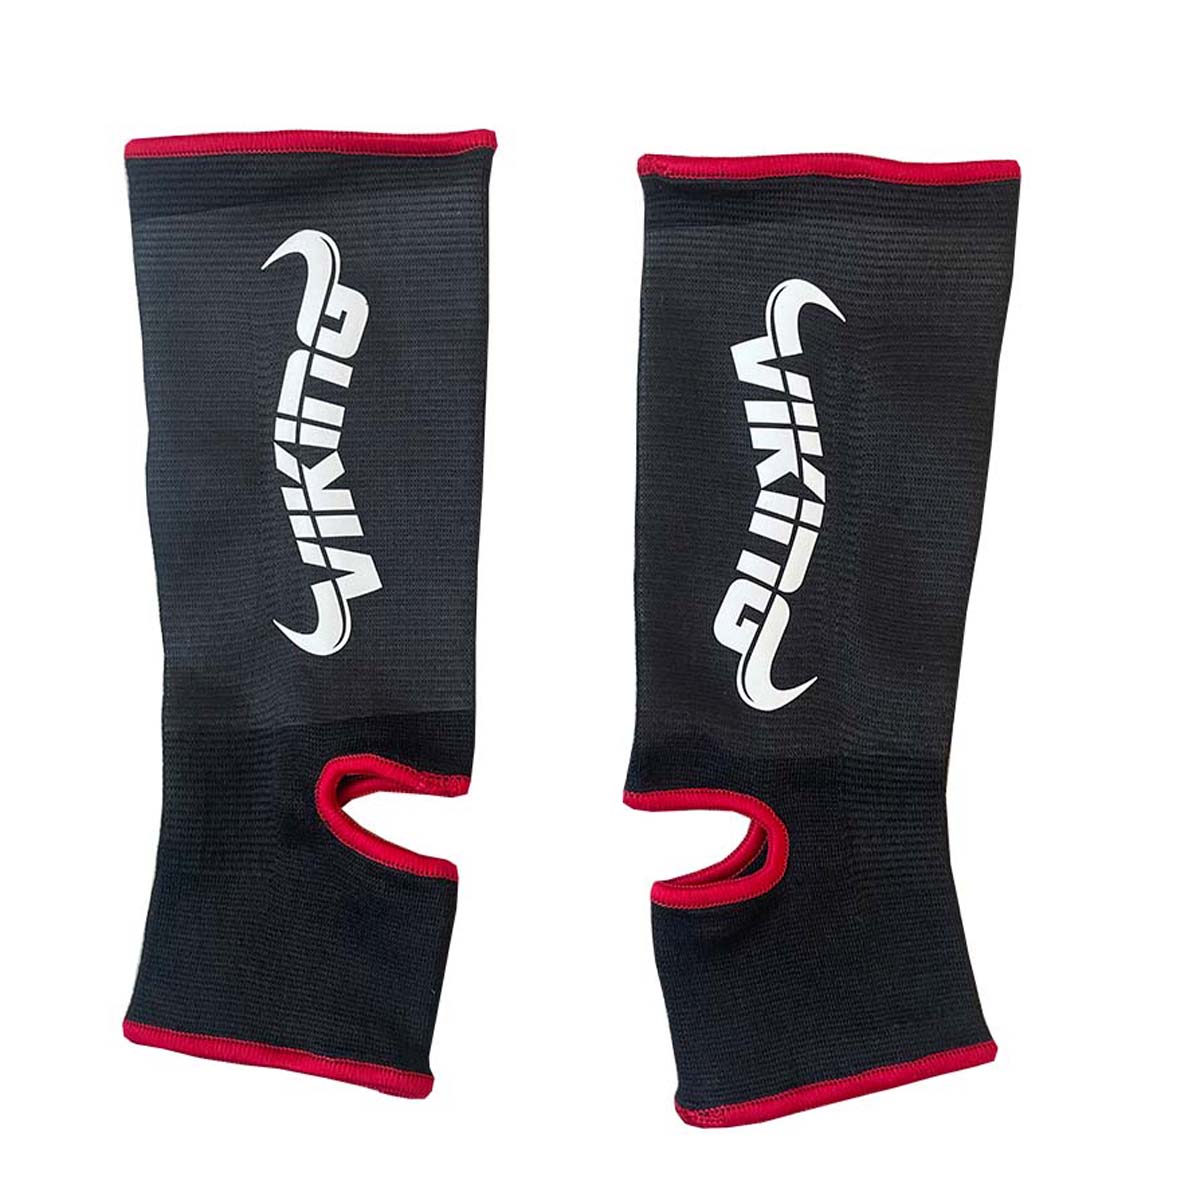 Venum Muay Thai/Kick Boxing Ankle Support Guard -- Black Ankle Support -  Buy Venum Muay Thai/Kick Boxing Ankle Support Guard -- Black Ankle Support  Online at Best Prices in India - Fitness